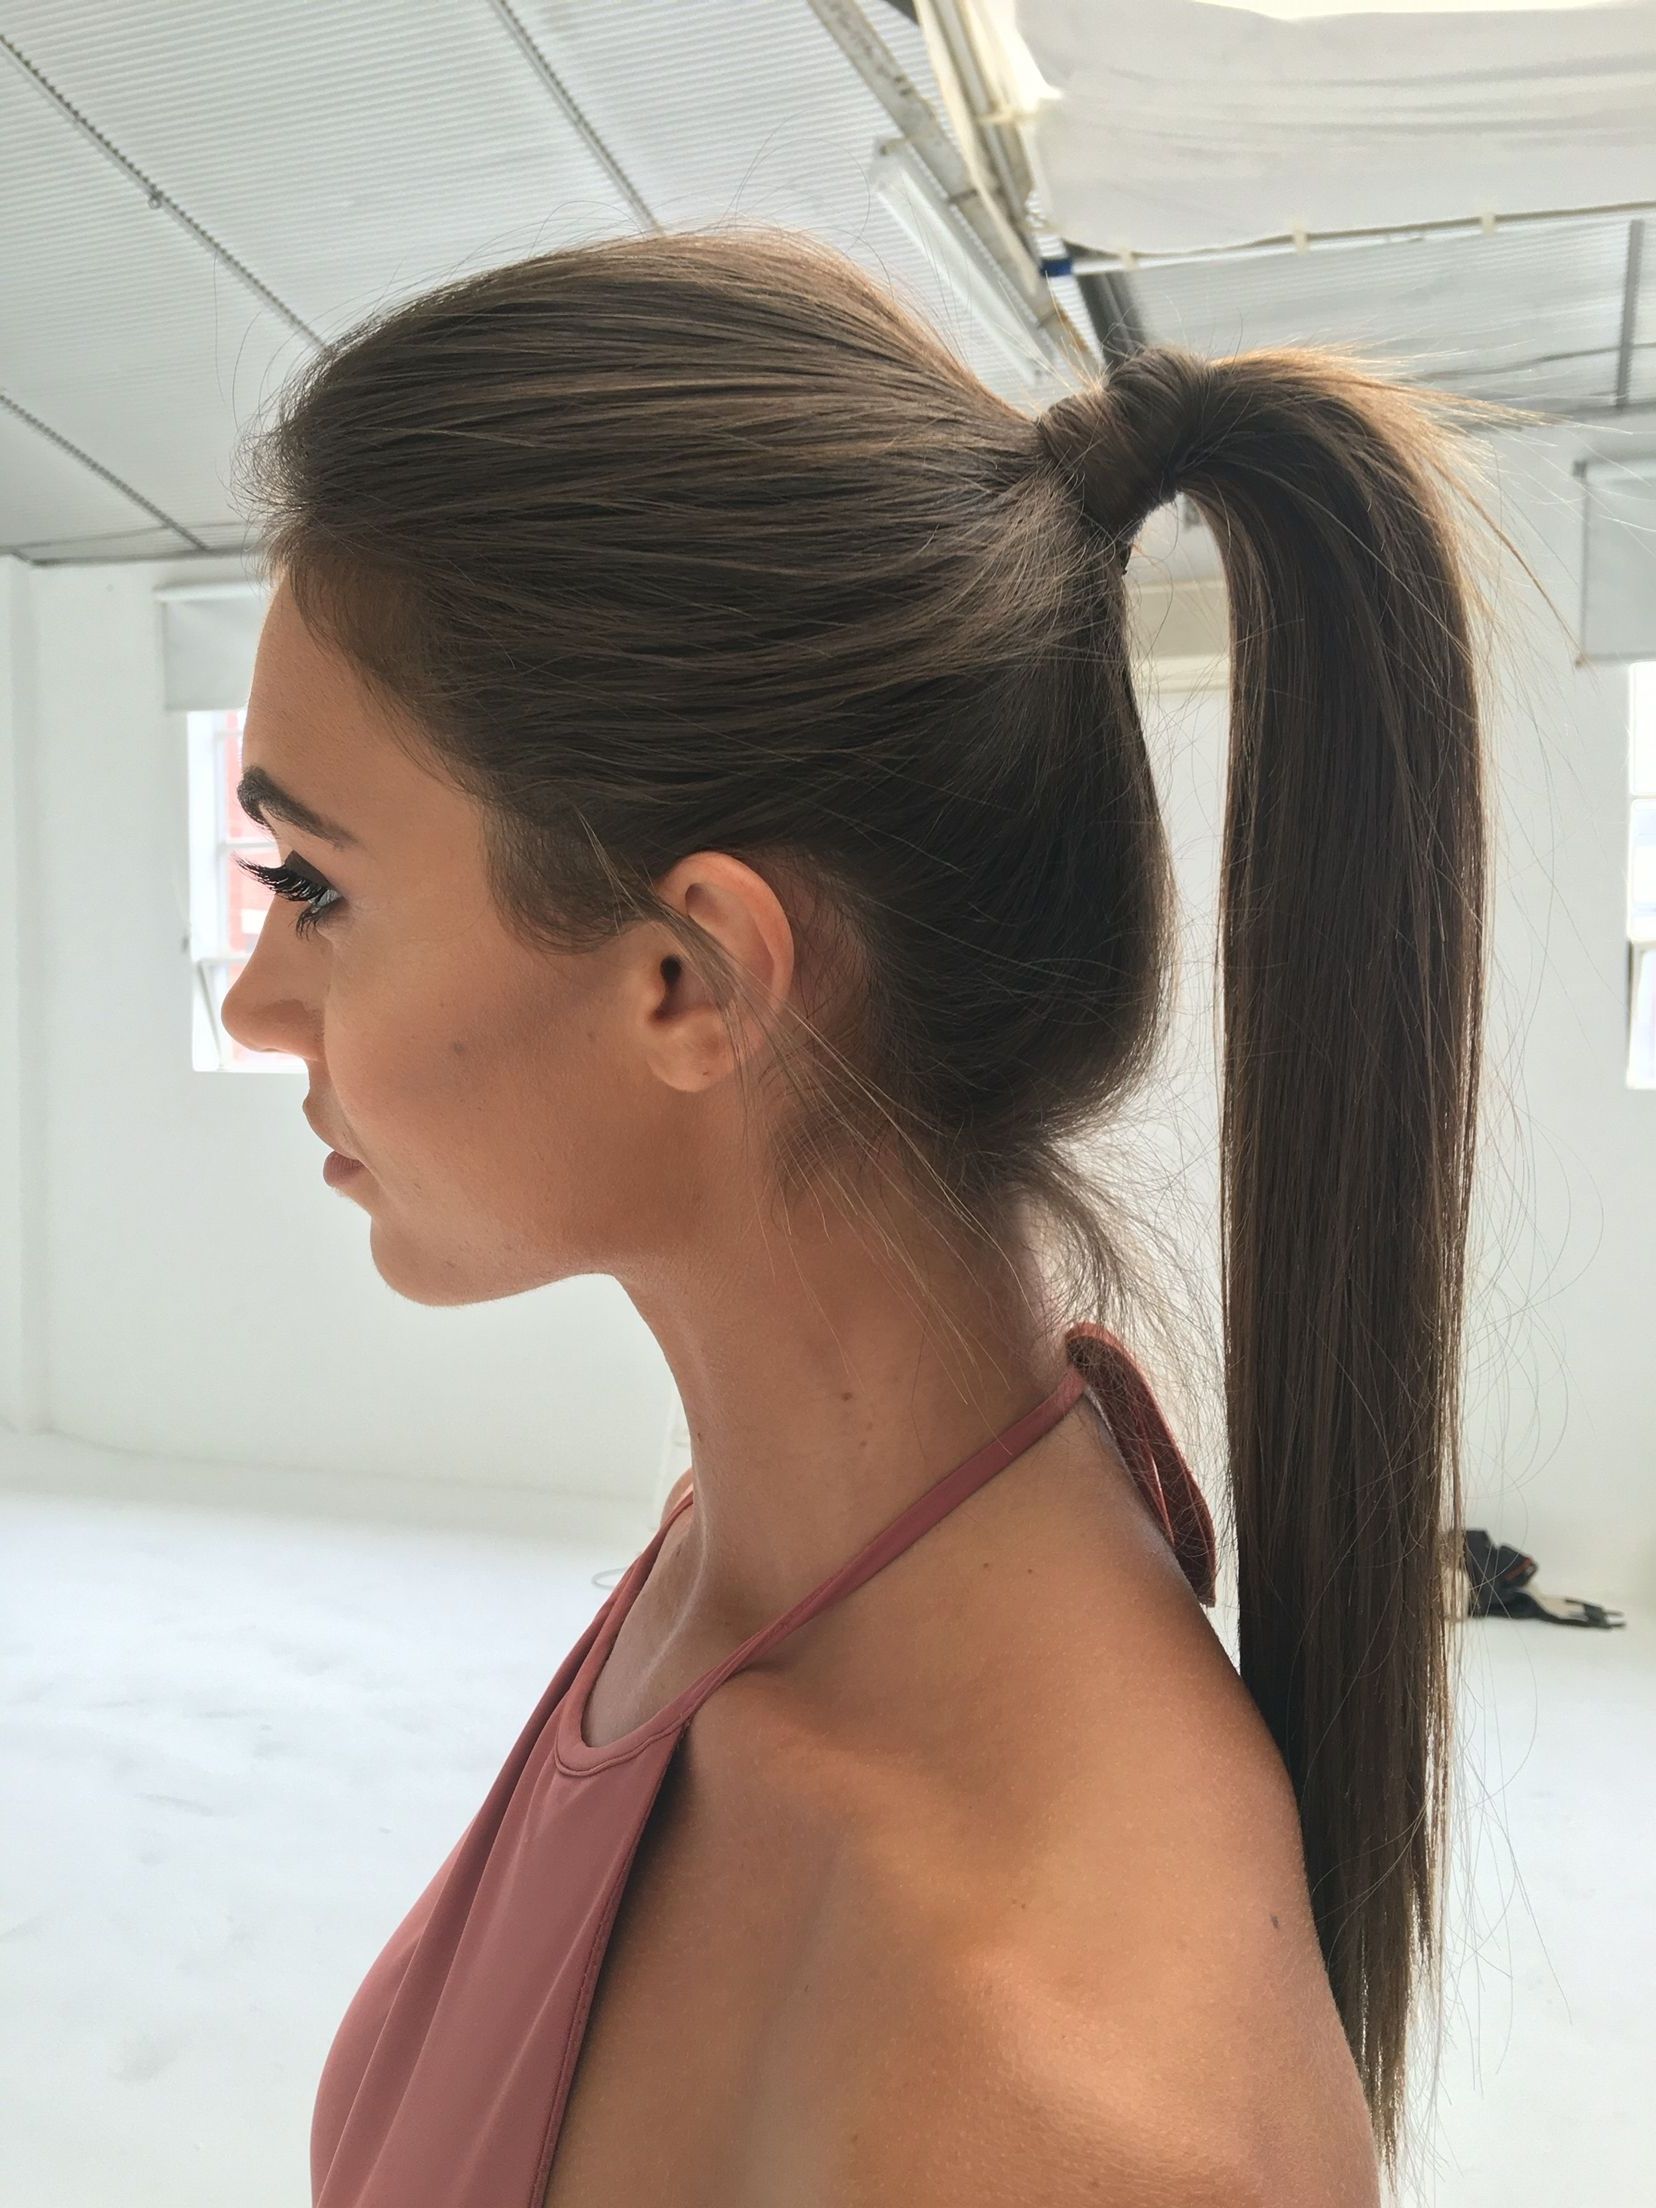 Best And Newest Sleek And Shiny Ponytail Hairstyles Inside High Ponytail, Ponytail Hairstyle, Ponytail, Sleek Ponytail (View 1 of 20)